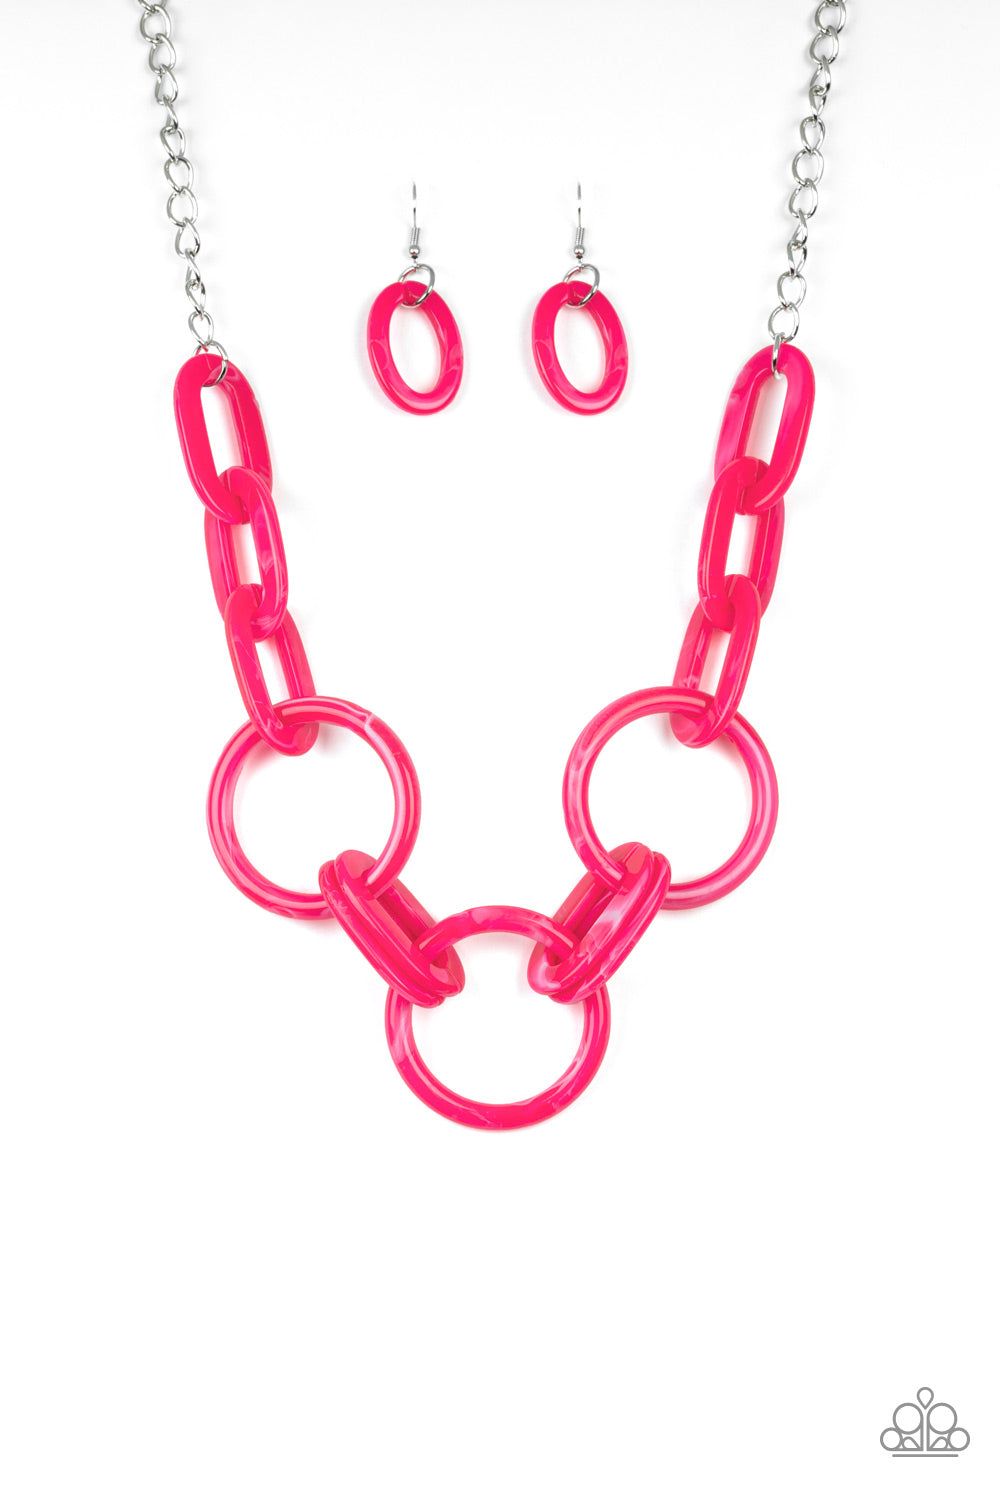 Paparazzi Accessories Turn Up the Heat - Pink Necklaces - Lady T Accessories